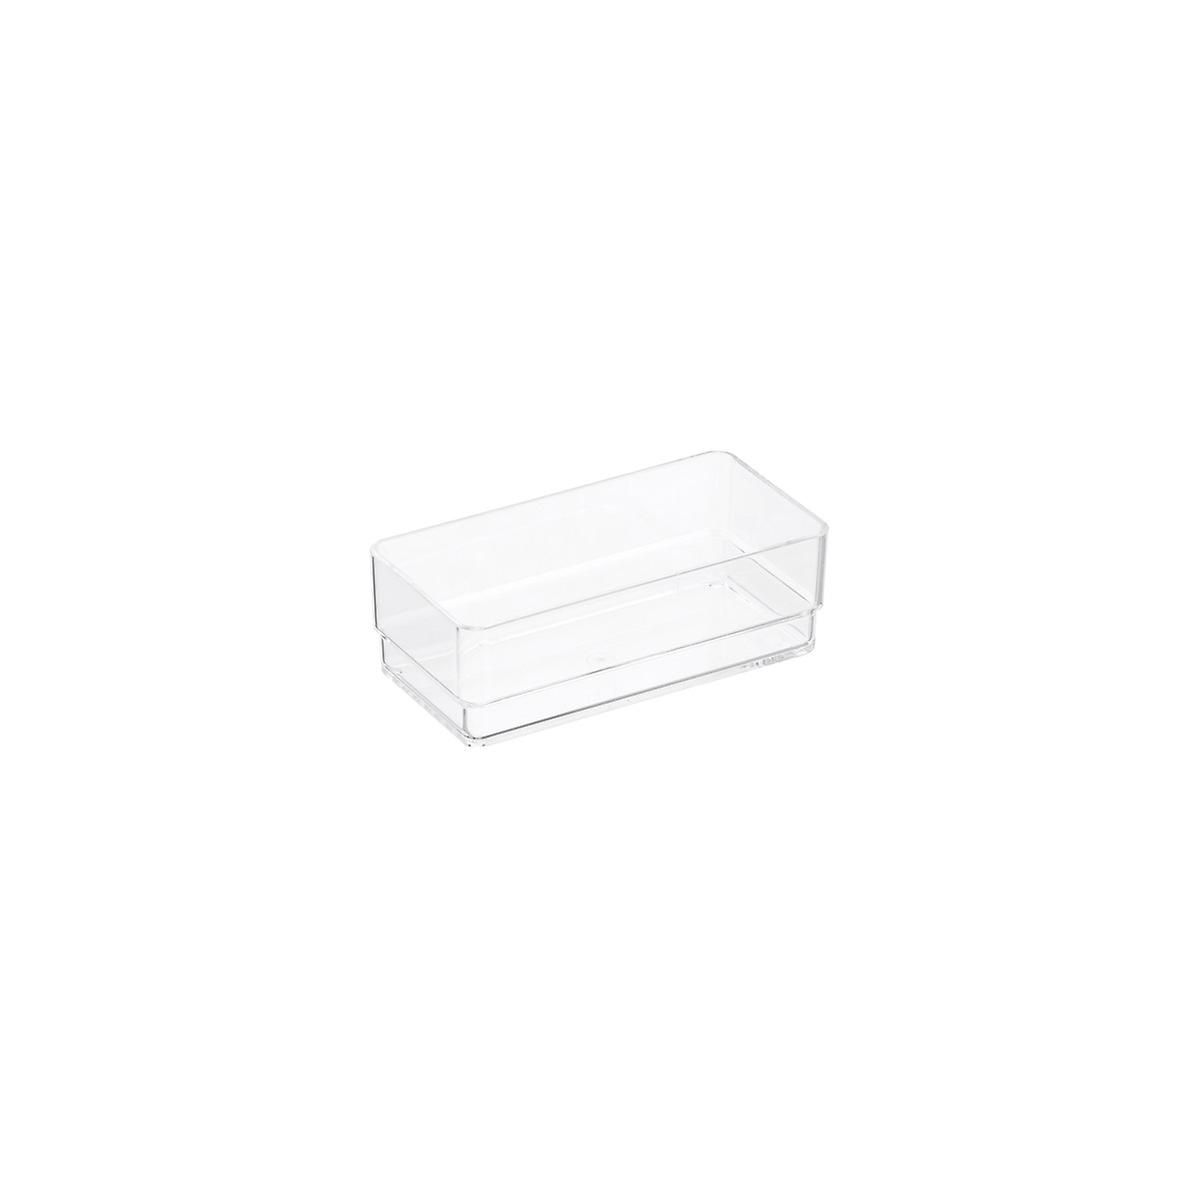 3" x 3" x 2" h Acrylic Drawer Organizer Clear | The Container Store